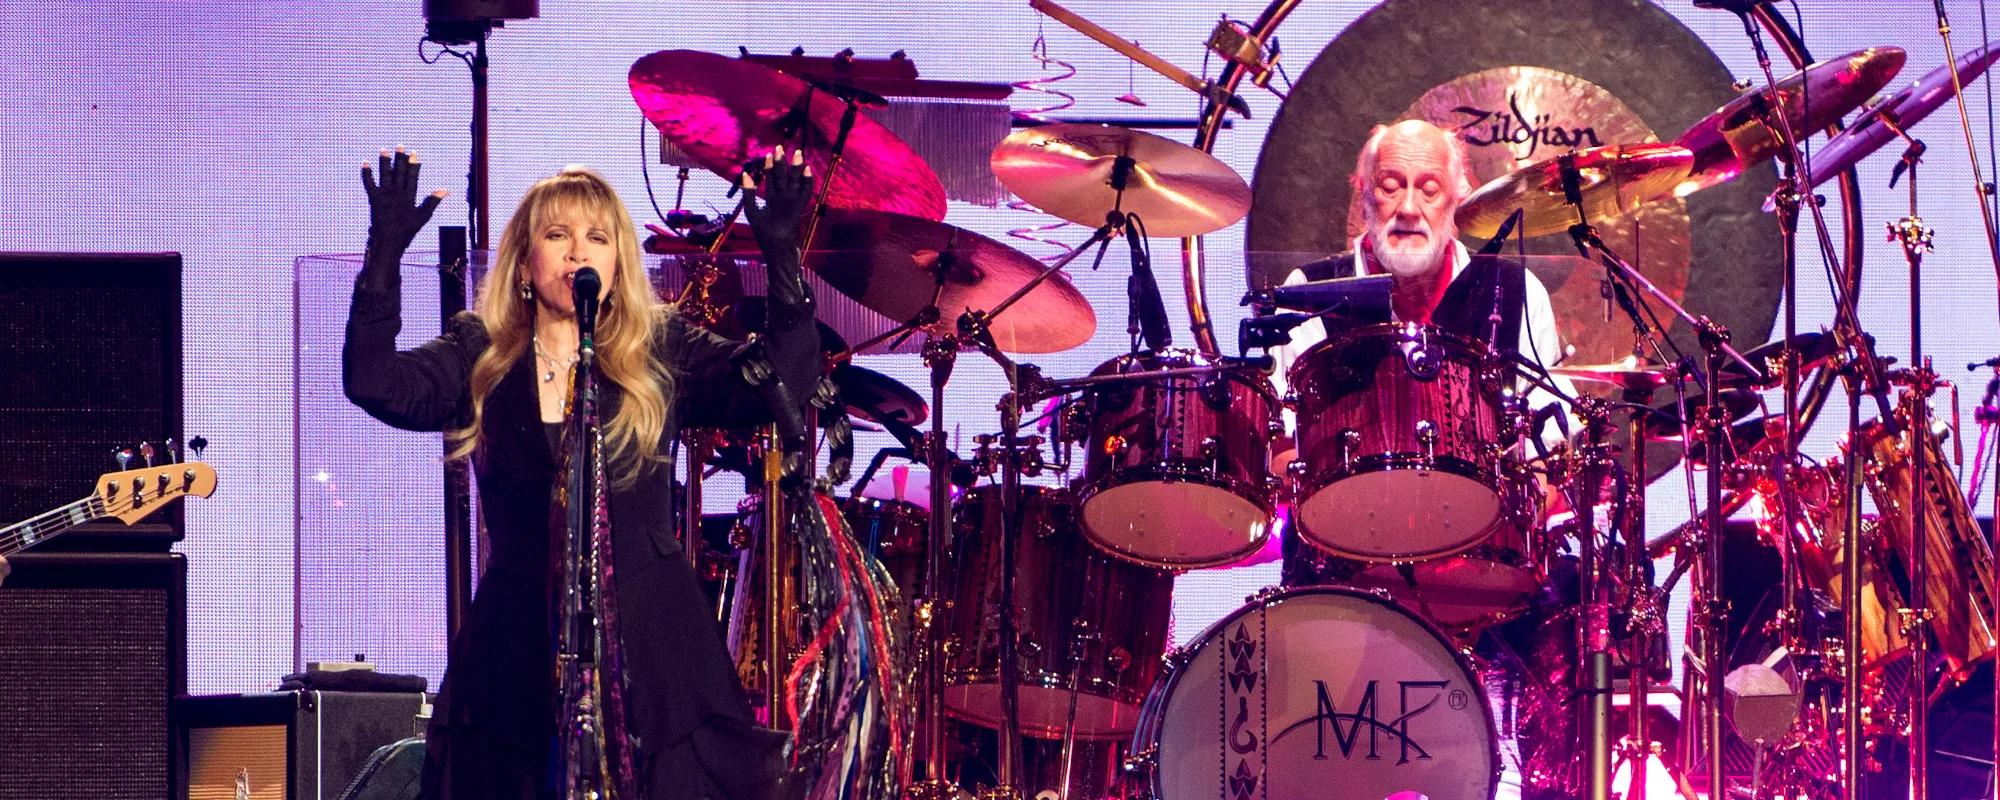 Fleetwood Mac Shares Rowdy Live Version of “Go Your Own Way”